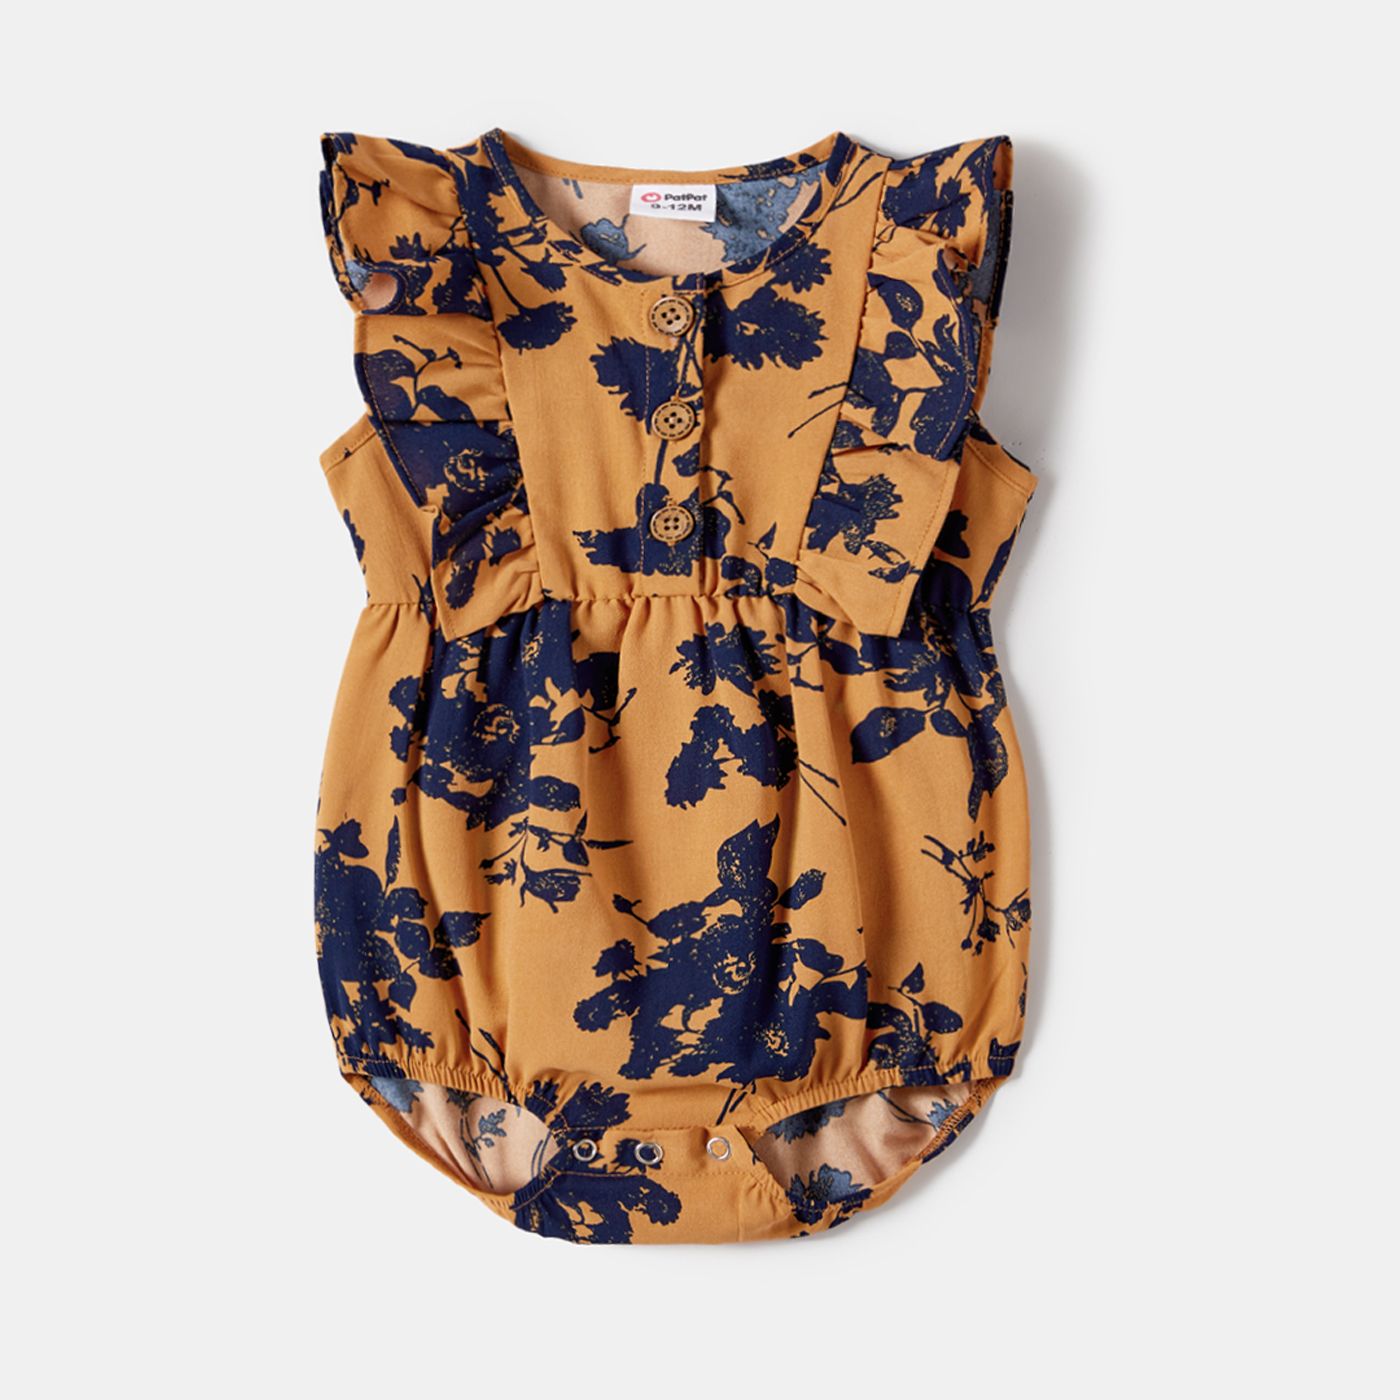 Family Matching Allover Floral Print Belted Dresses And Color Block Polo Neck T-shirts Sets